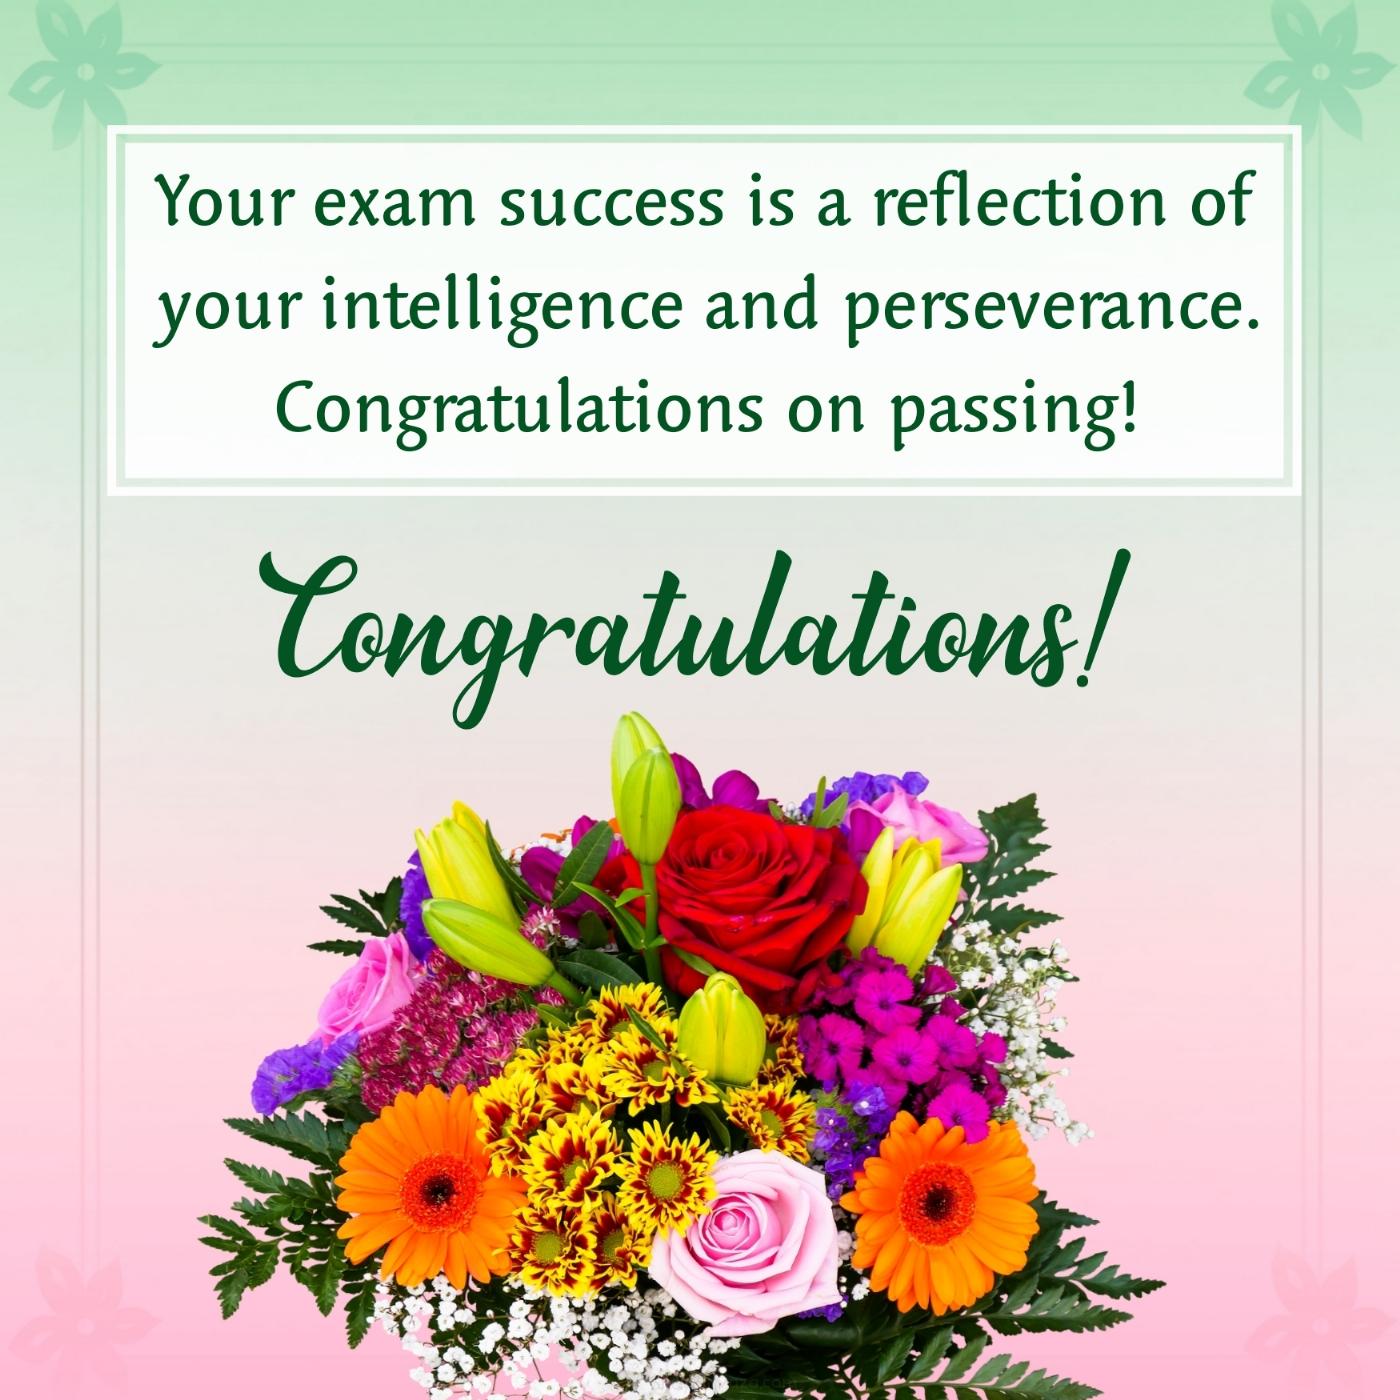 Your exam success is a reflection of your intelligence and perseverance